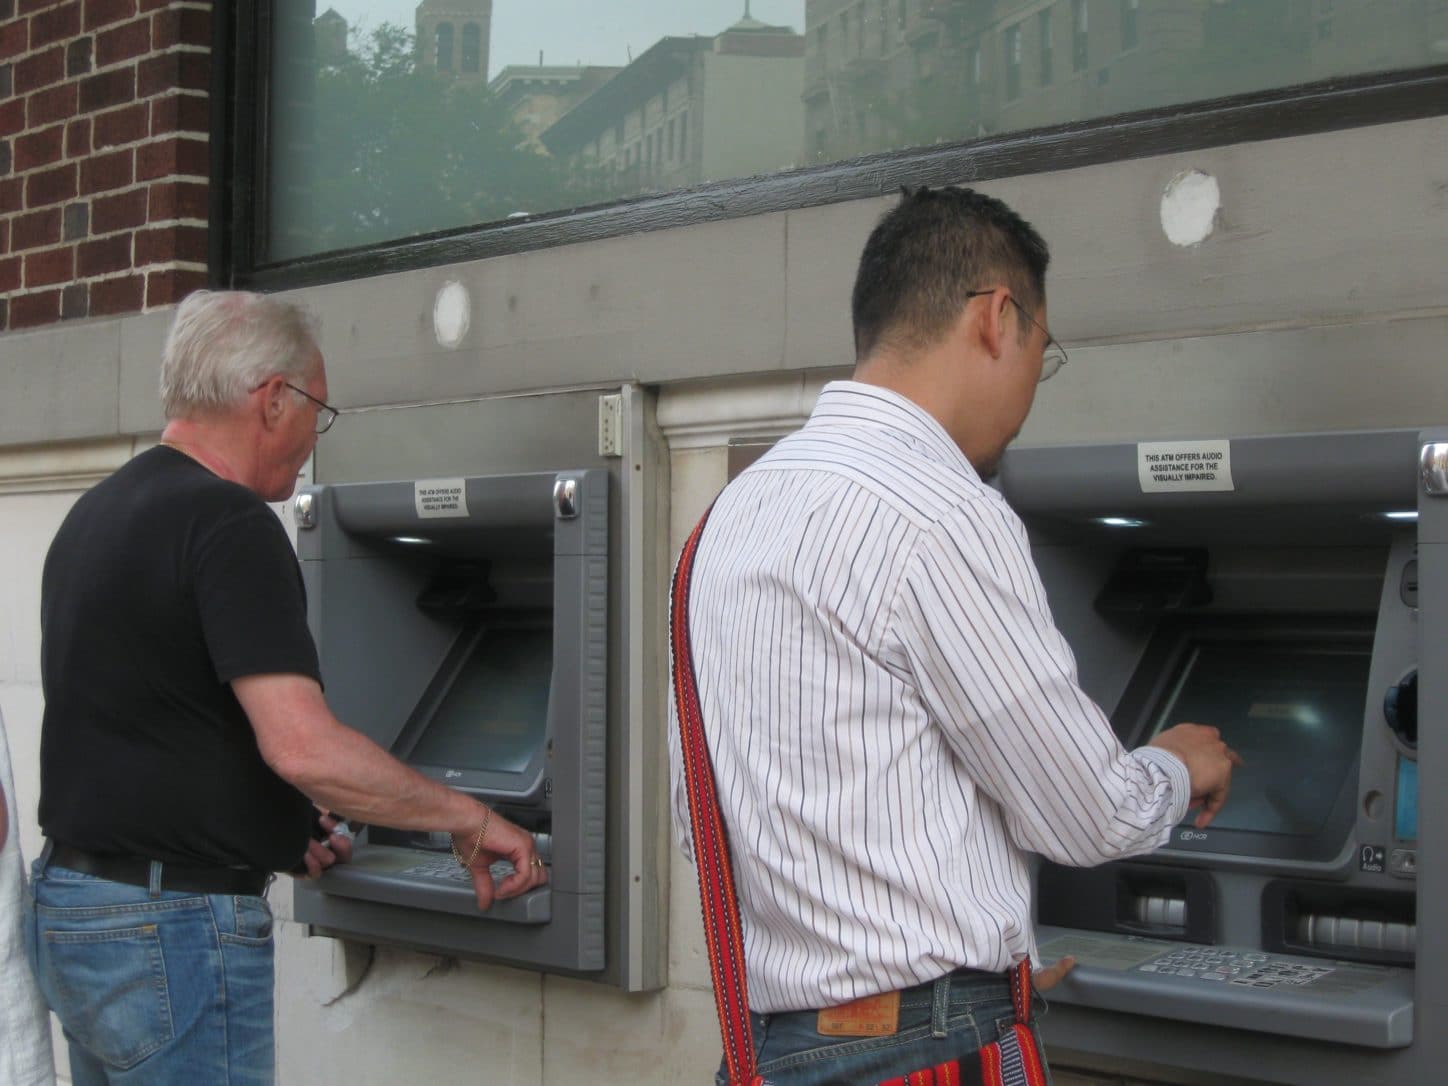 6 Tips for Protection at the ATM